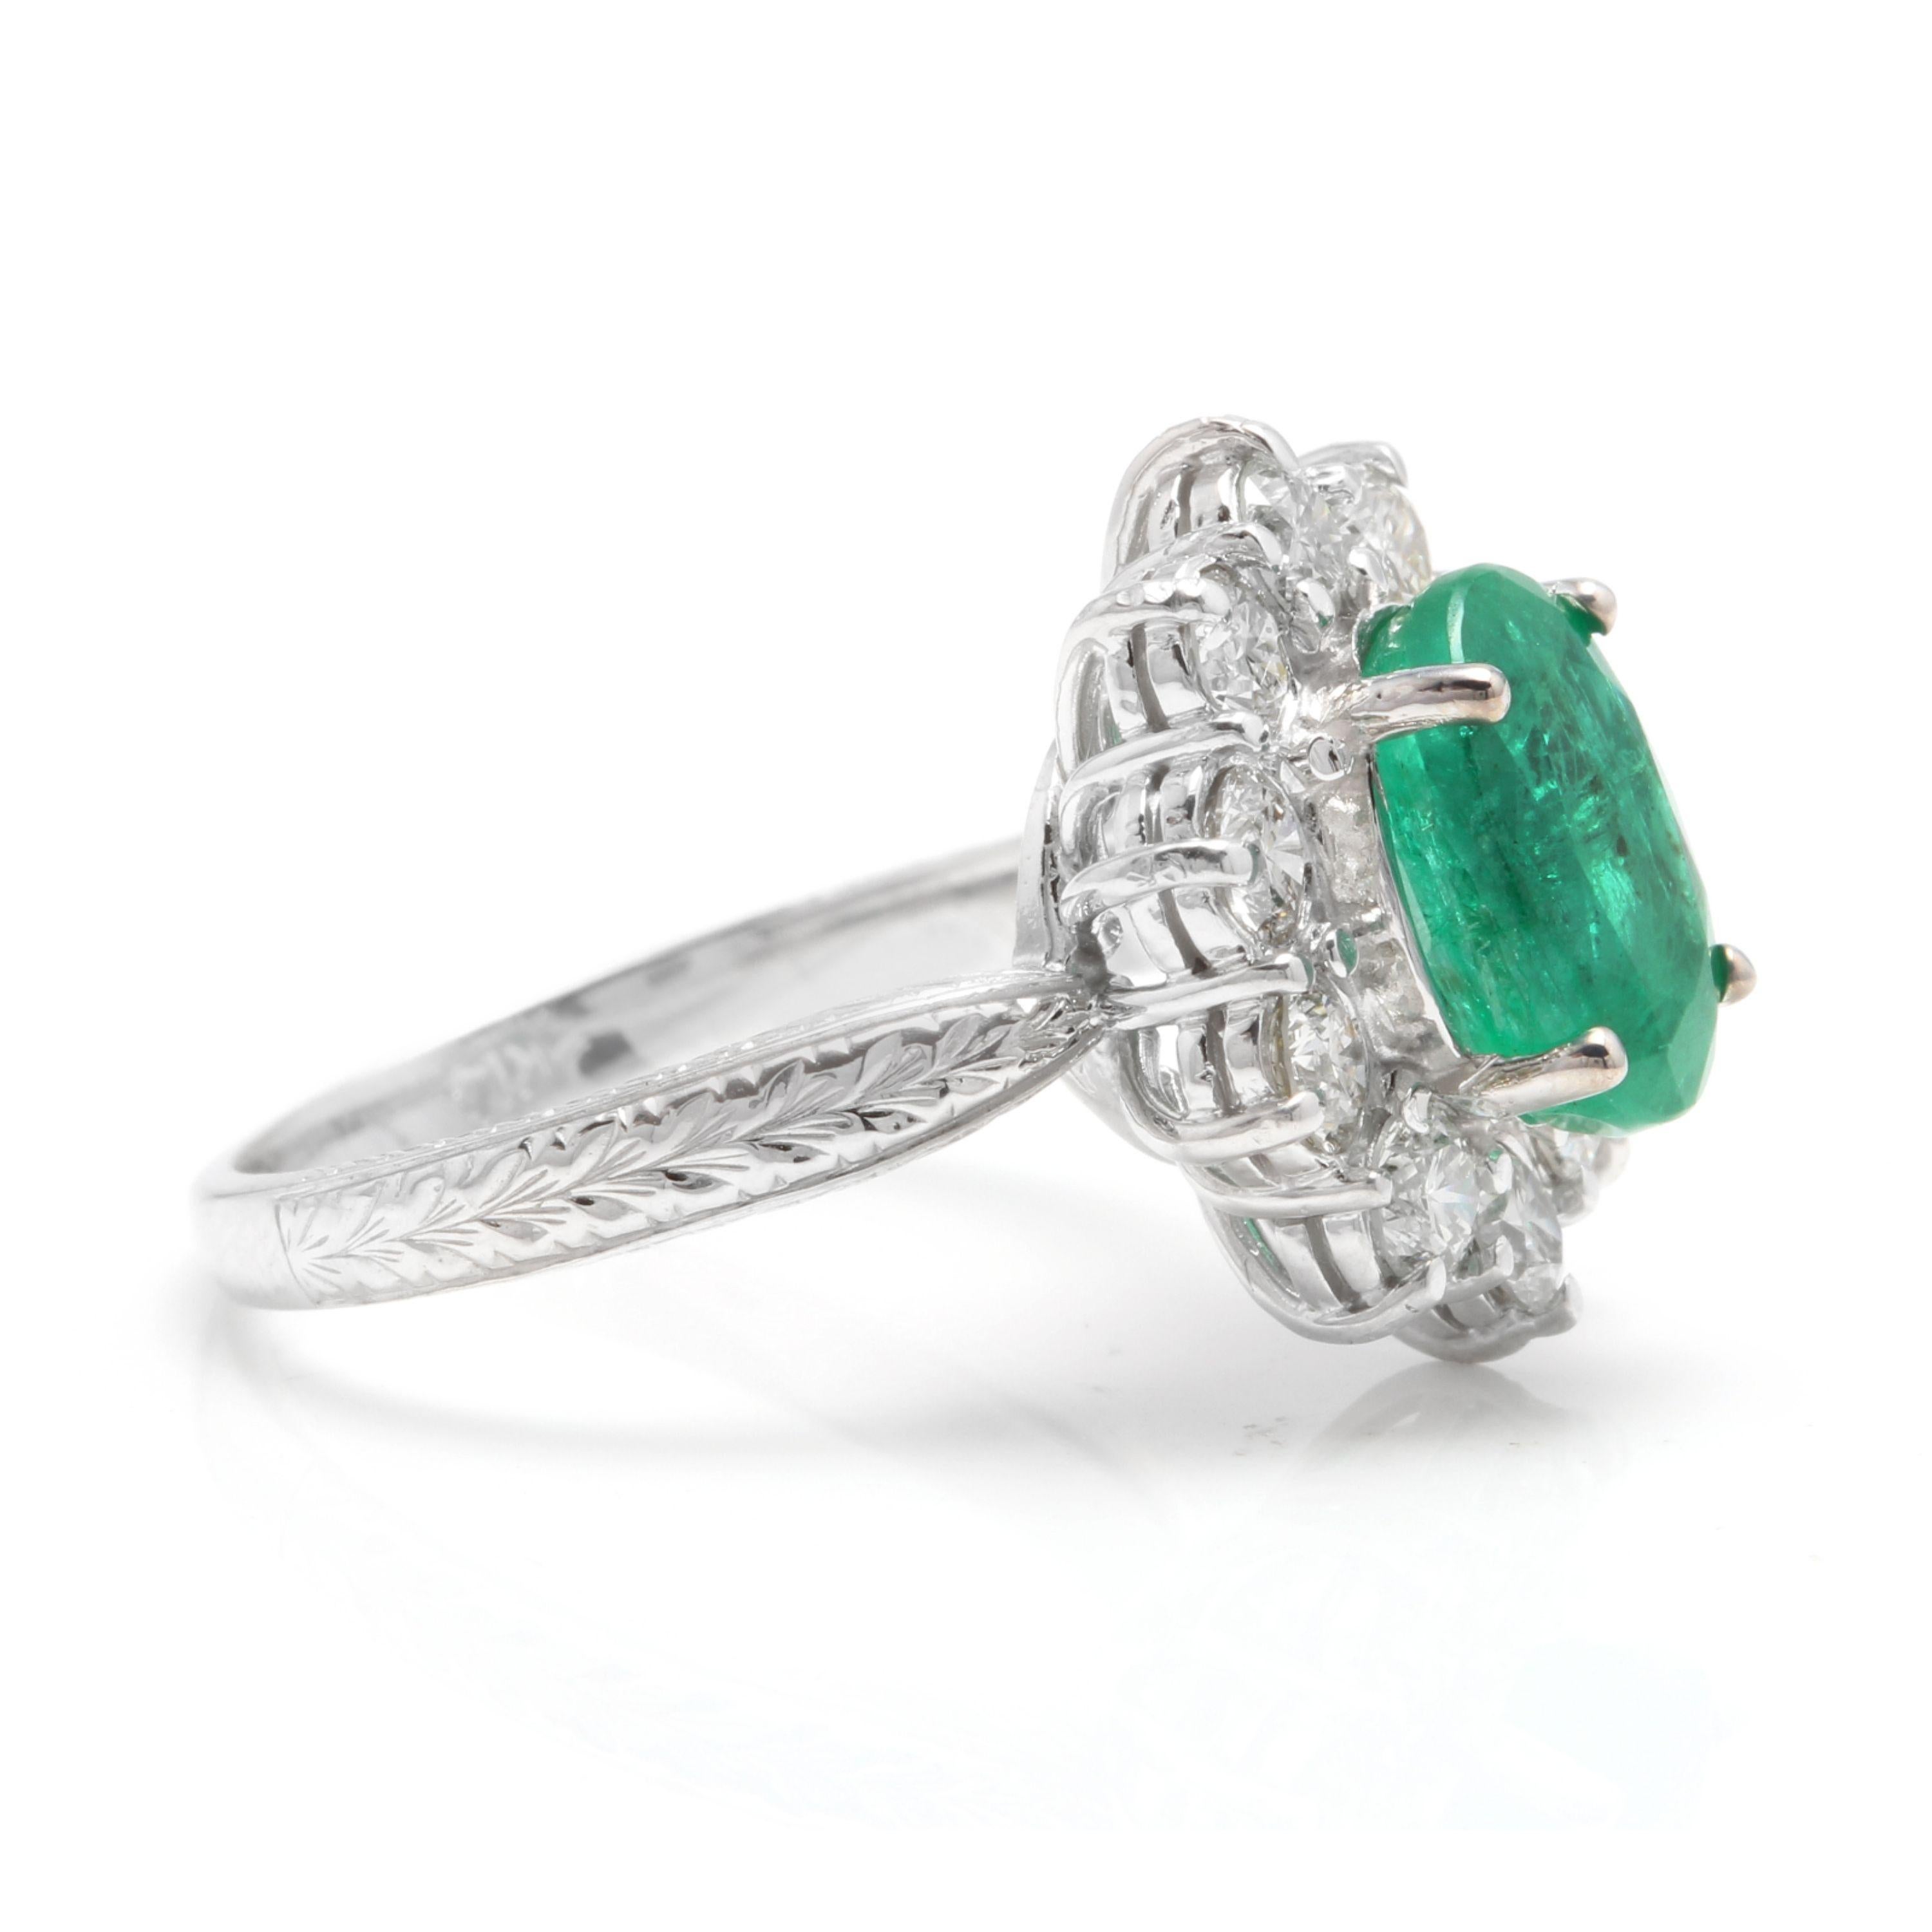 Emerald Cut 5.20 Carat Exquisite Emerald and Diamond 14 Karat Solid White Gold Ring For Sale